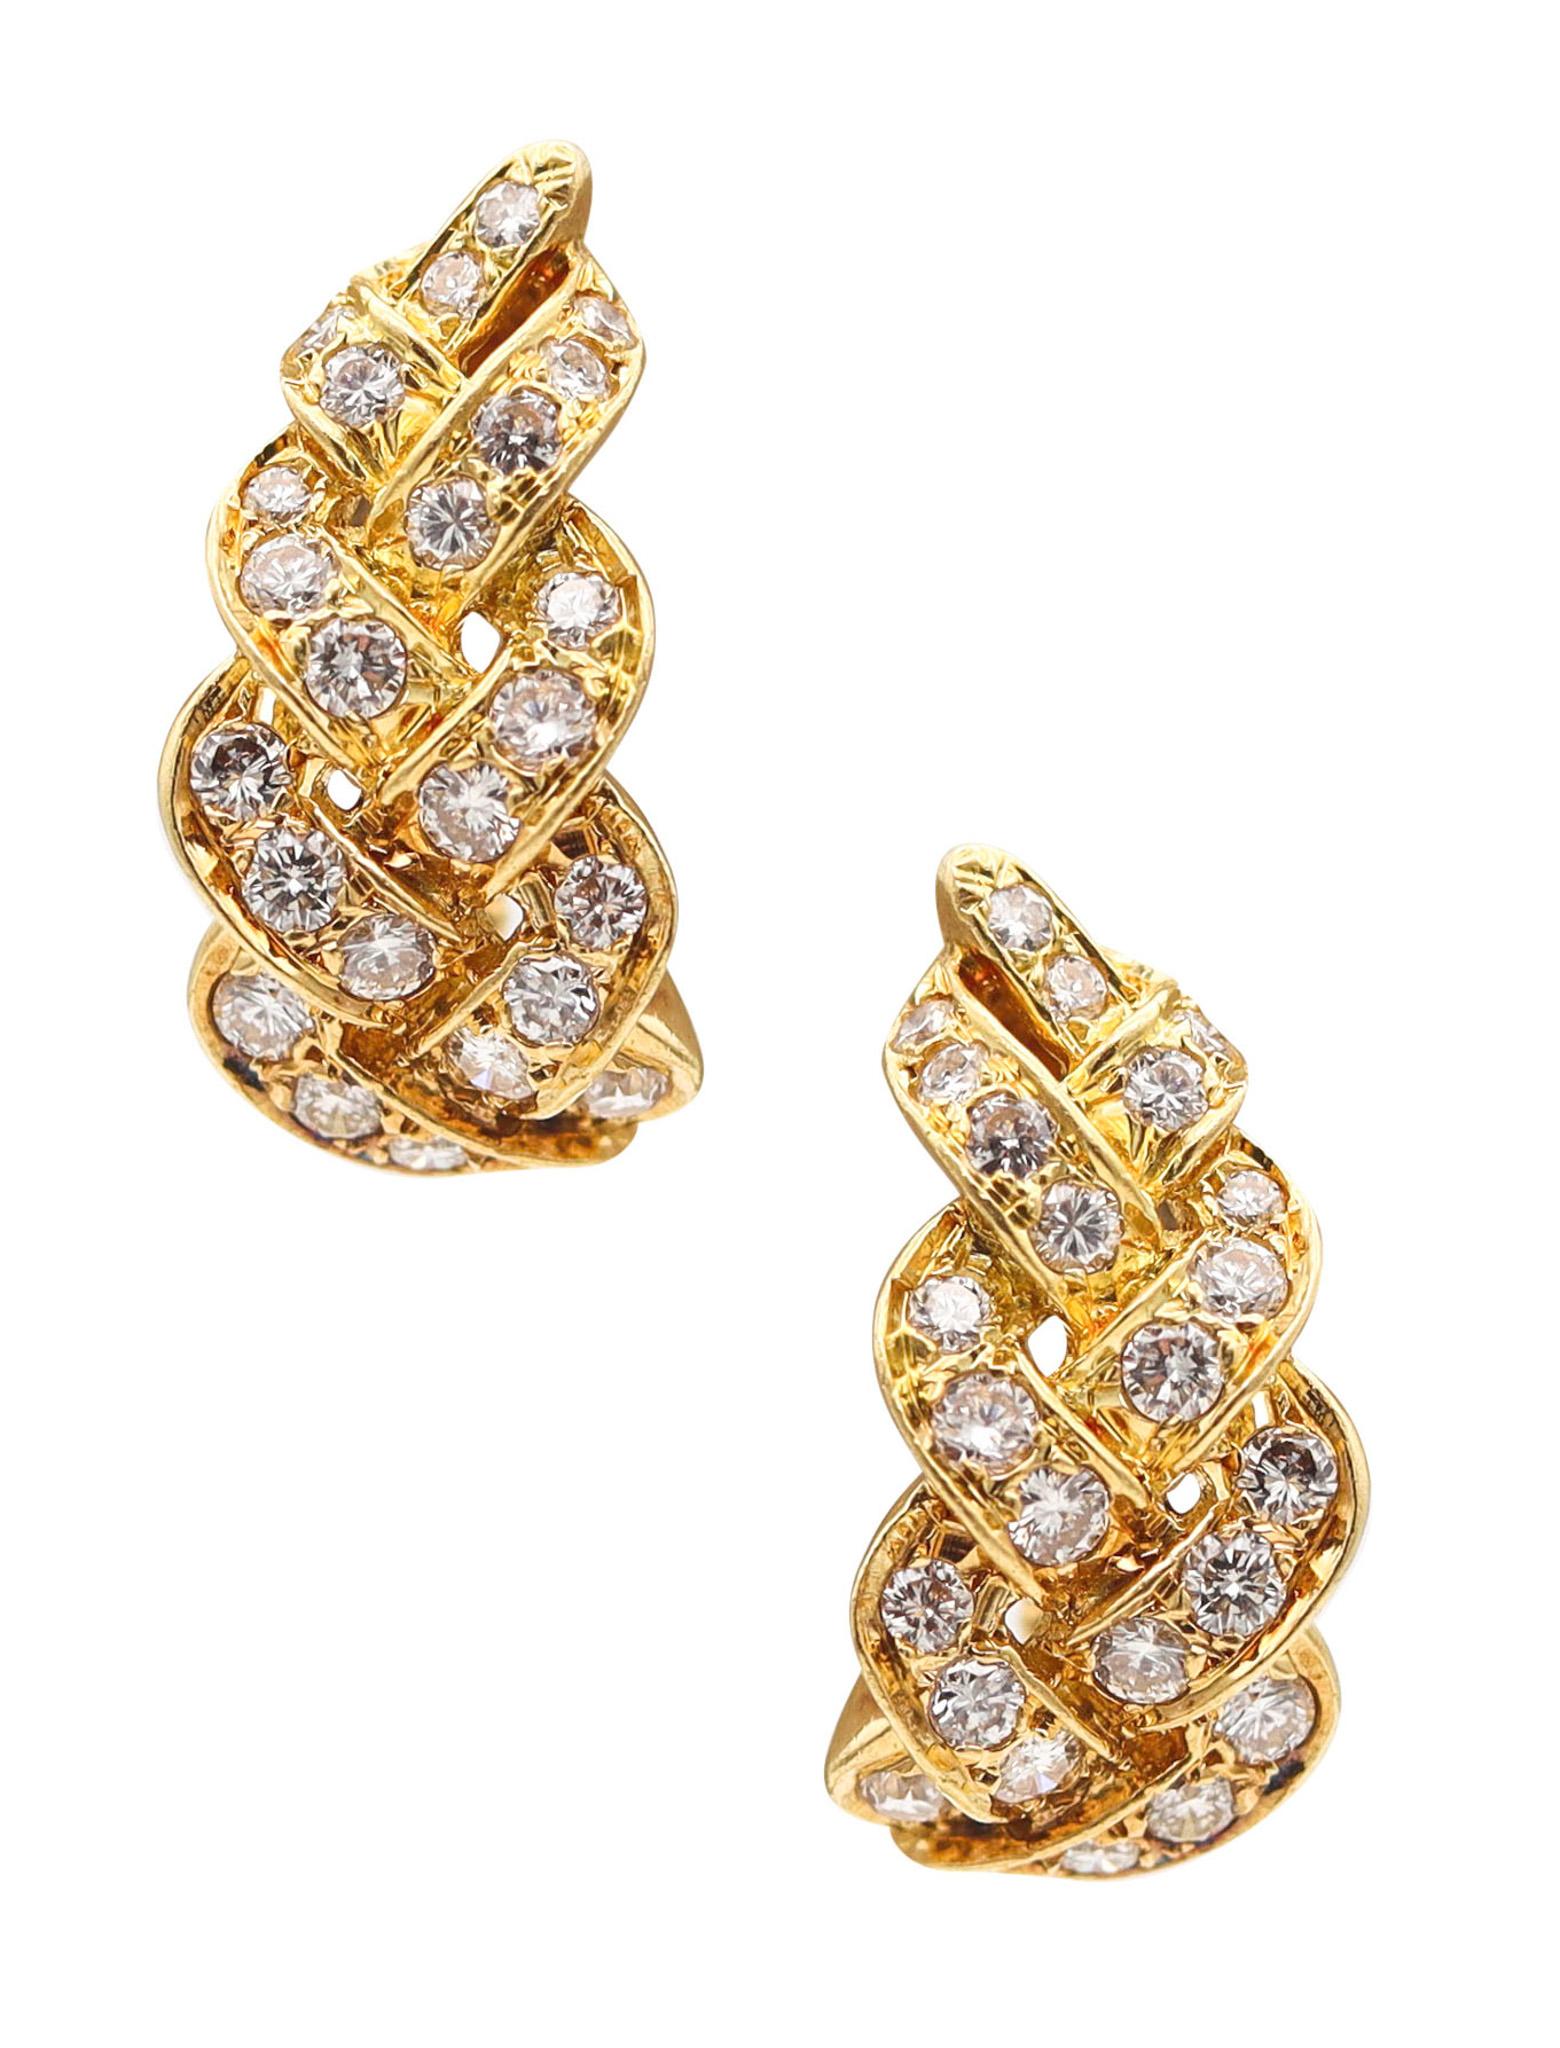 Fred Of Paris Hoops Earrings In 18Kt Yellow Gold With 2.64 Ctw In VS Diamonds For Sale